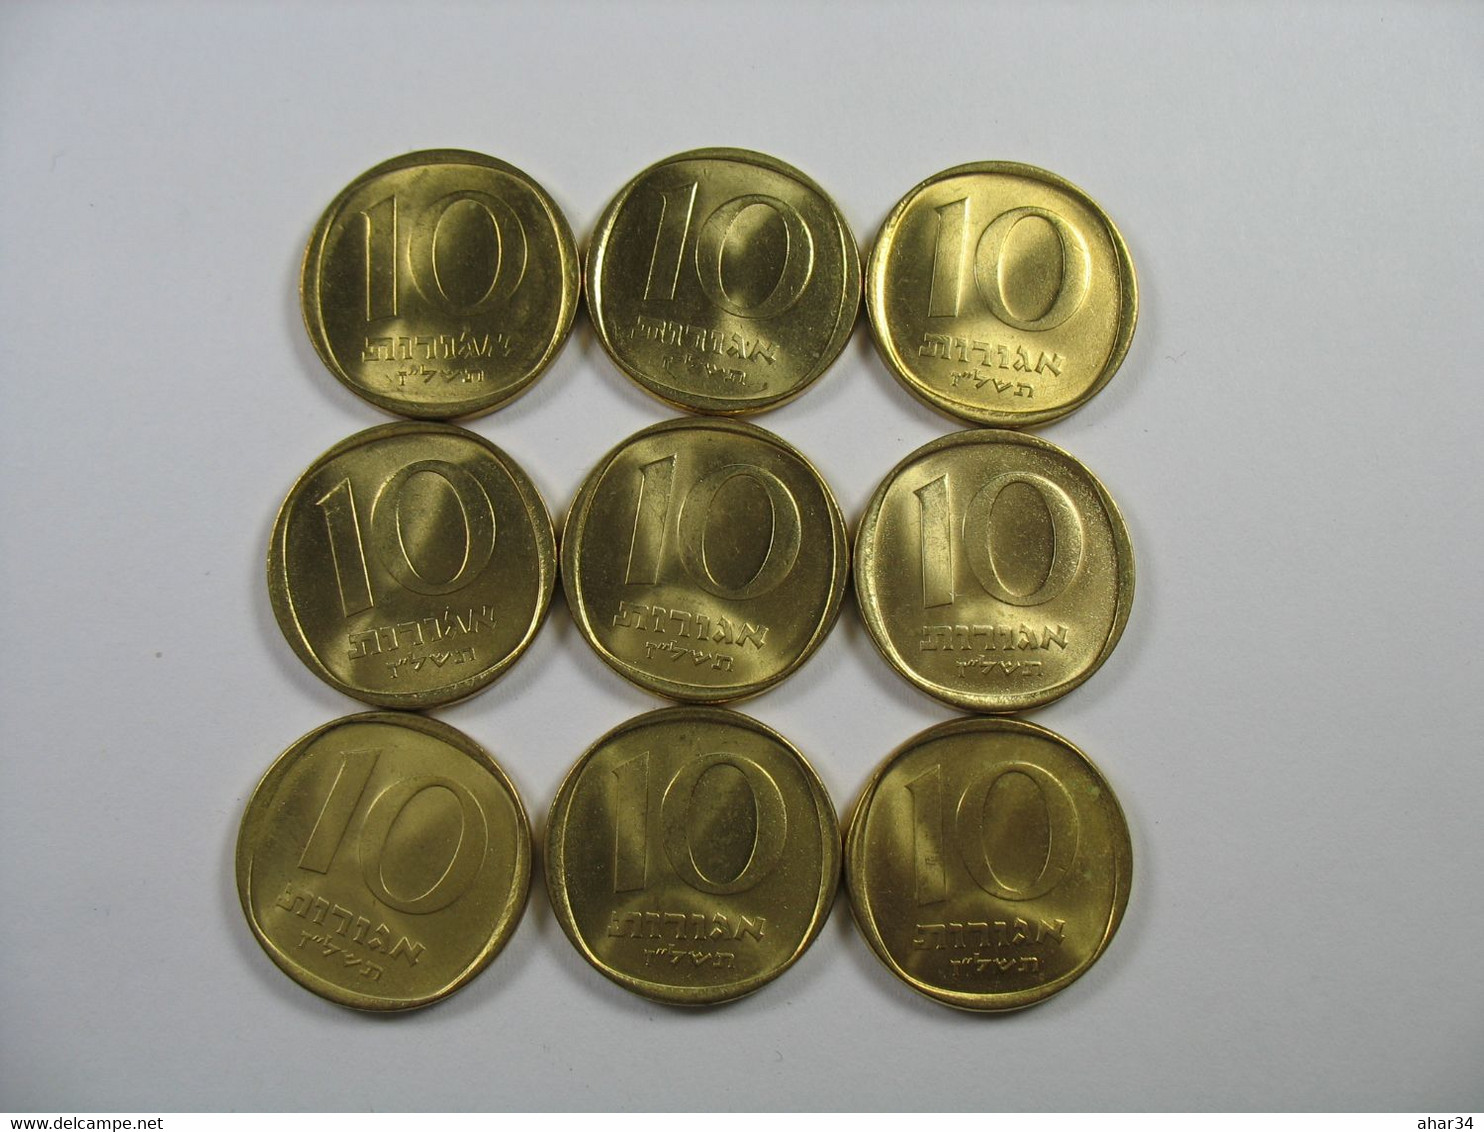 TEMPLATE LISTING ISRAEL  LOT OF  50  COINS 10 AGORA UNC   1960-1980  FREE SHIPPING REGISTERED SURFACE MAIL  COIN. - Other - Asia